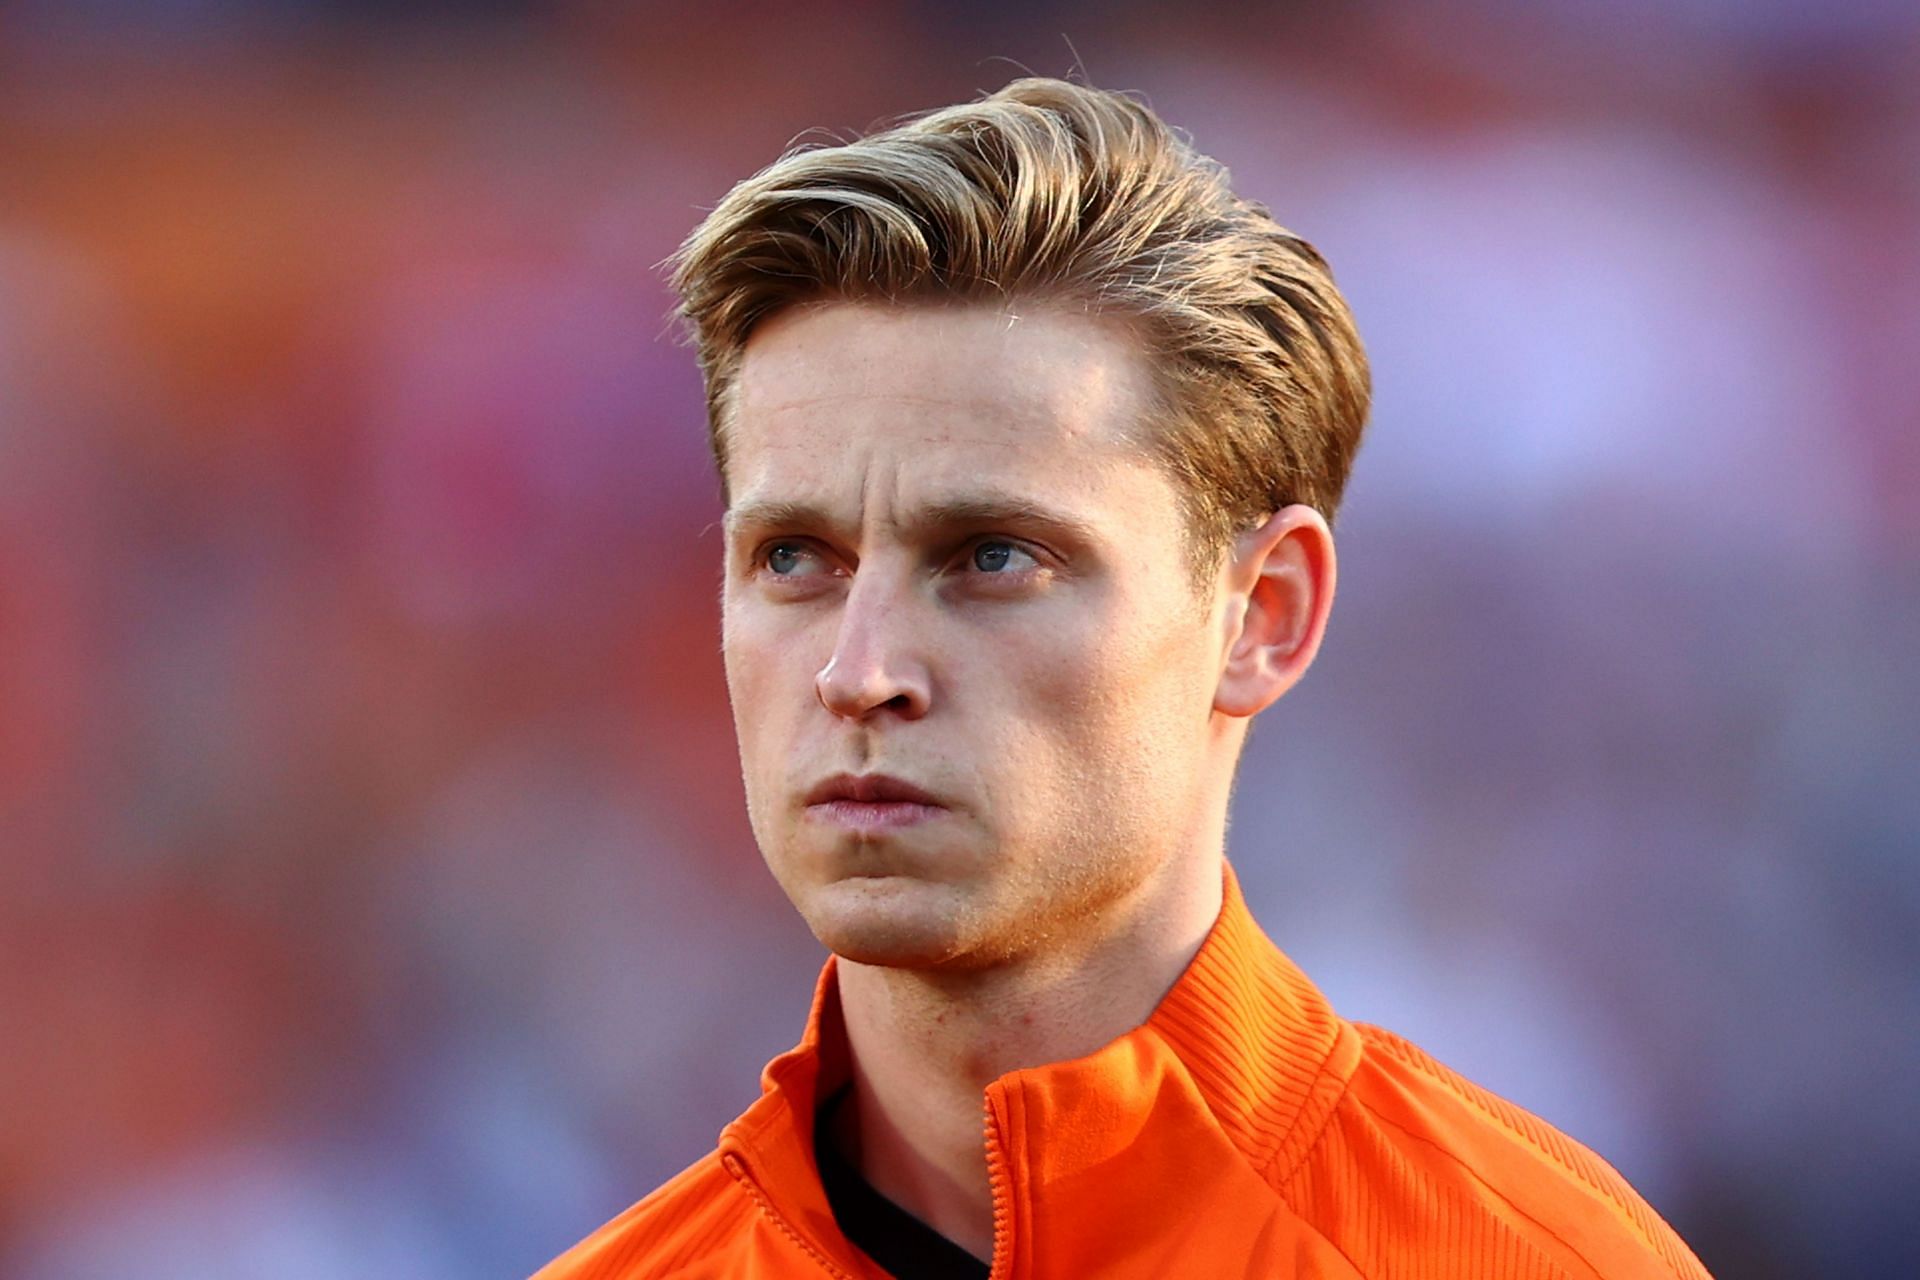 Frenkie de Dong has been a Manchester United target this summer